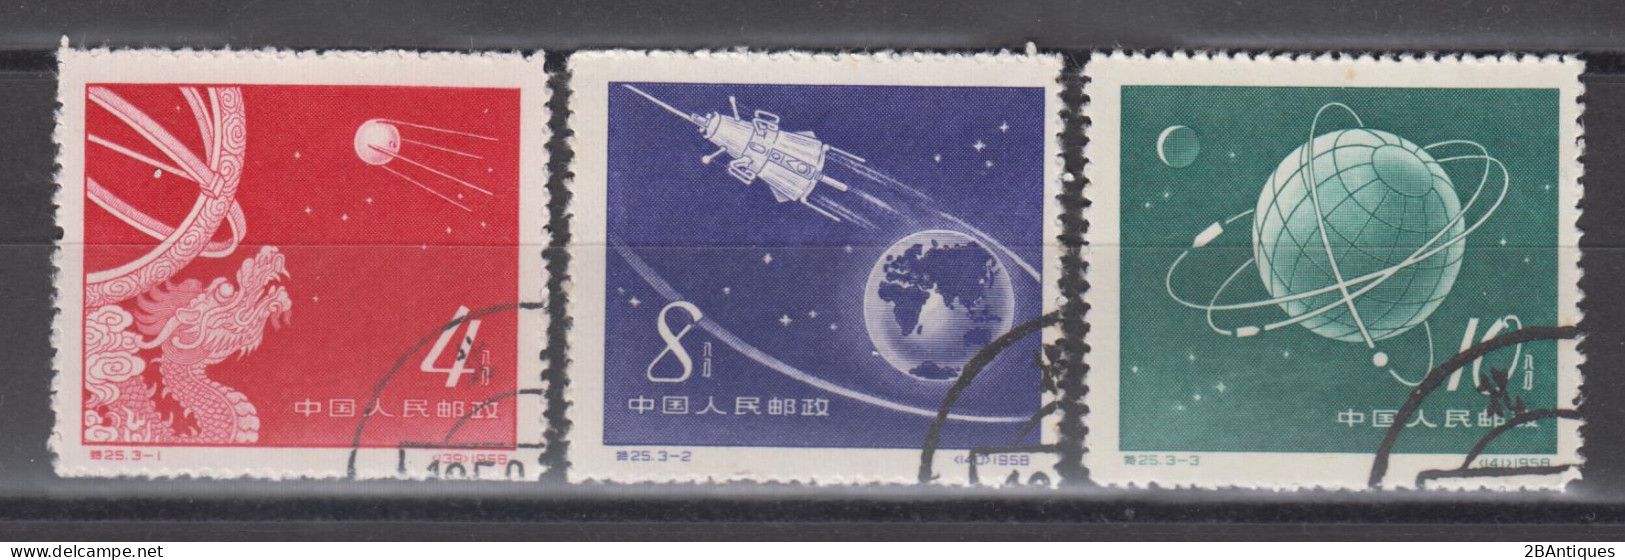 PR CHINA 1958 - Russian Sputnik Commemoration CTO XF With Very Nice Cancellation! - Used Stamps